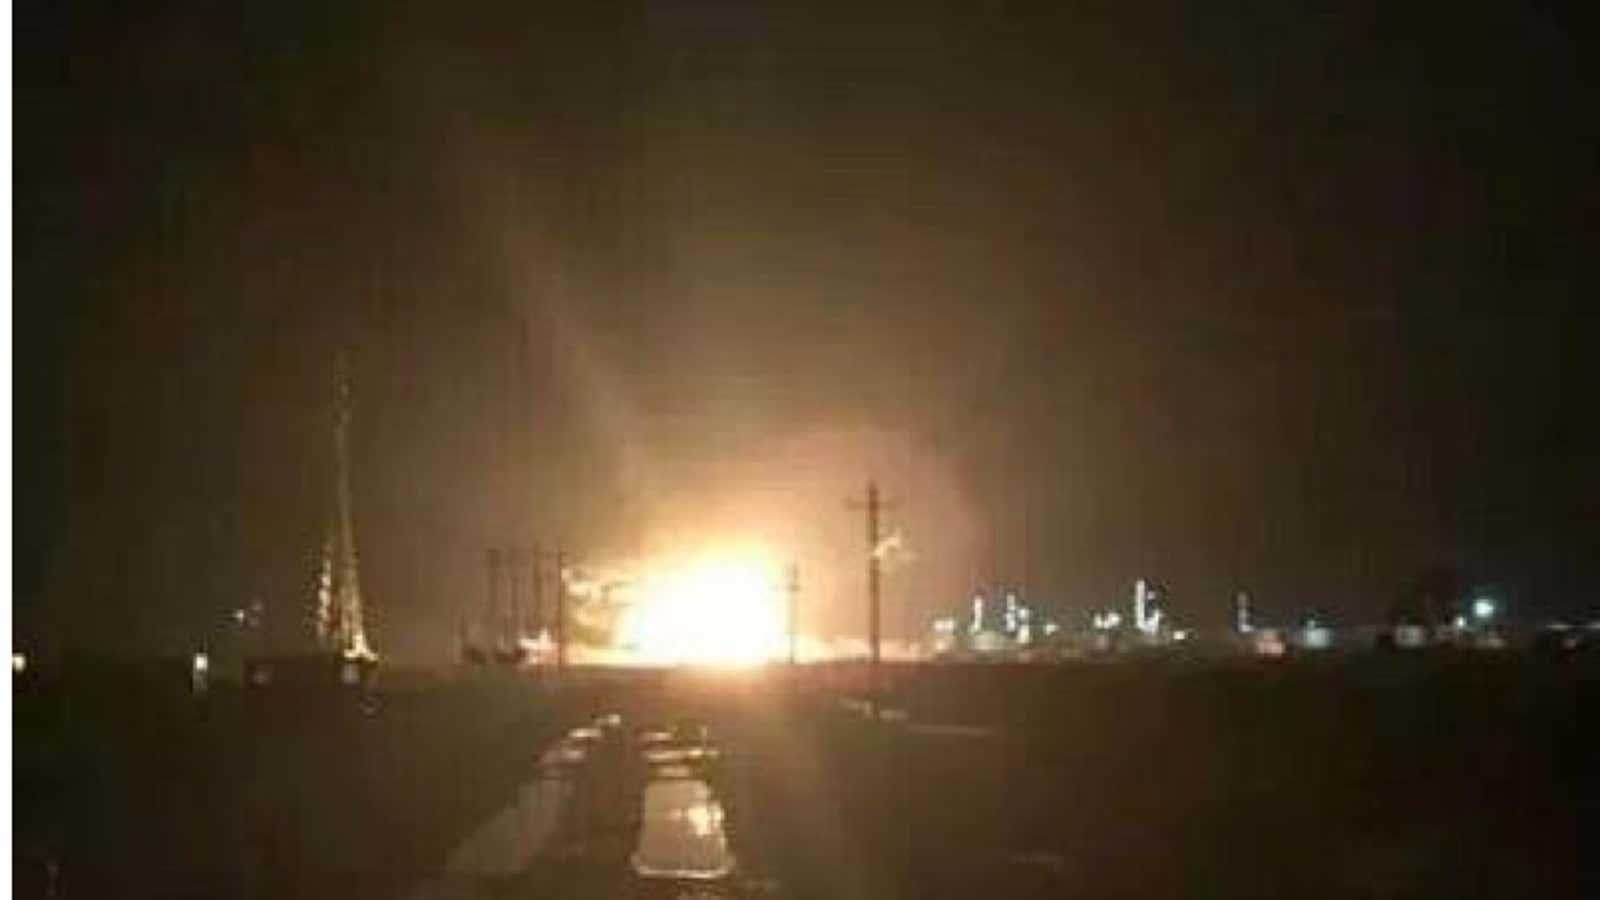 Another Chinese industrial zone has experienced a major explosion